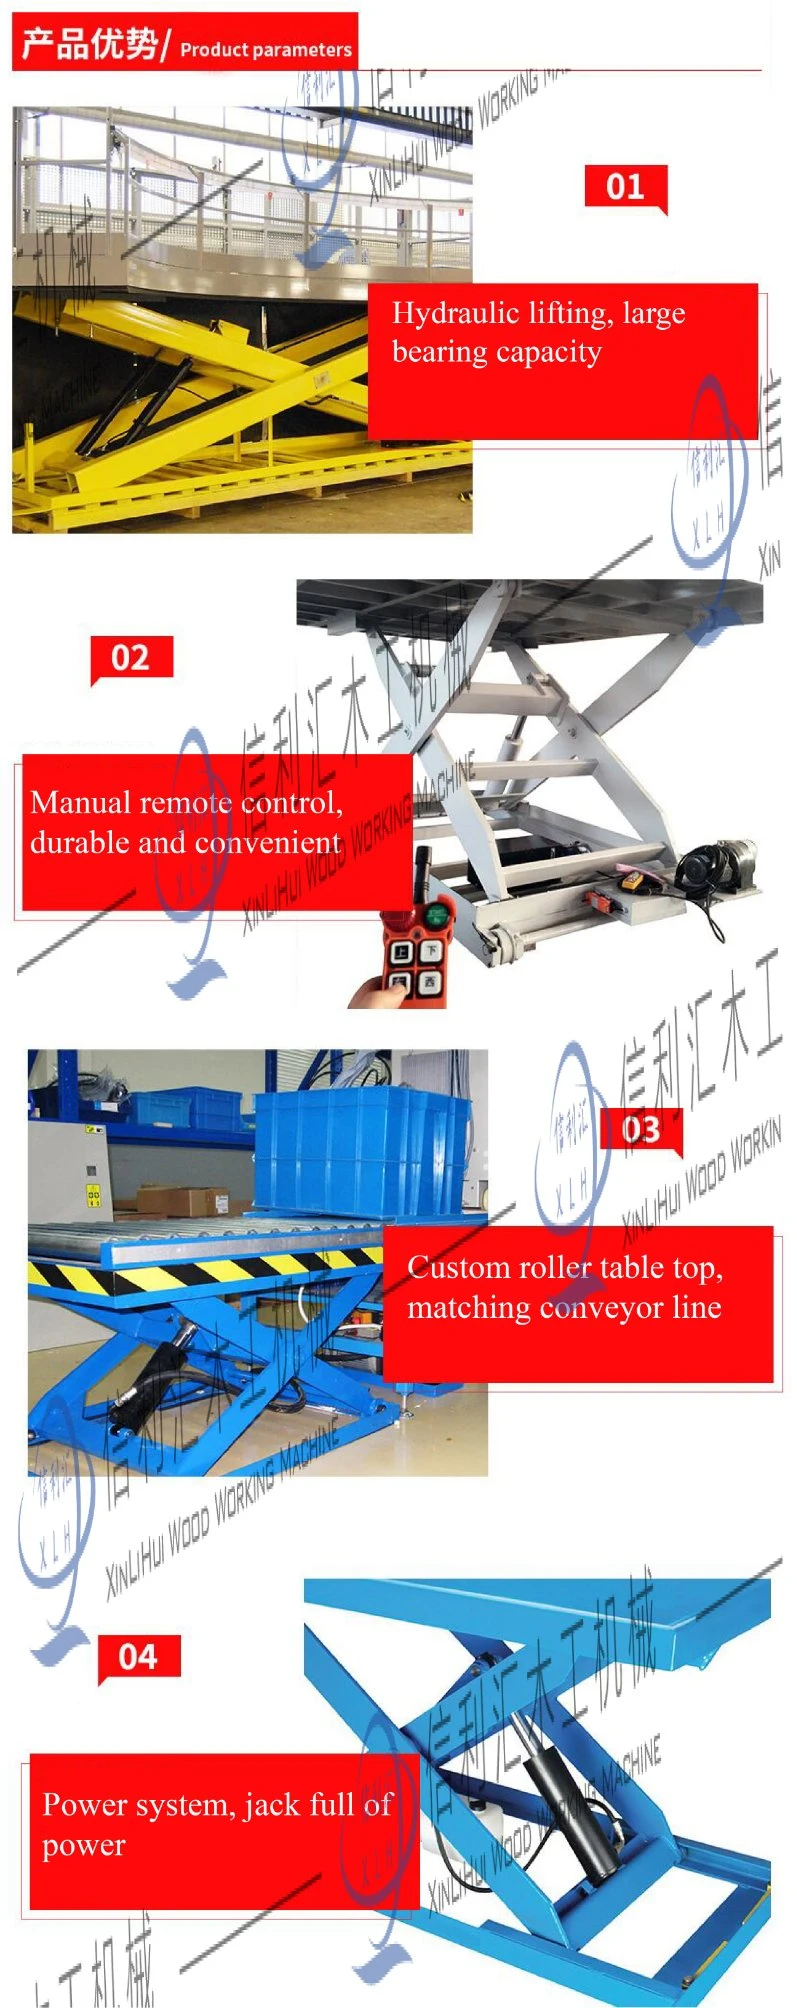 Pneumatic Double Cylinder Car Lift, Pneumatic Double Cylinder Lift, Pneumatic Lift, Pneumatic in Ground Lift Made in China